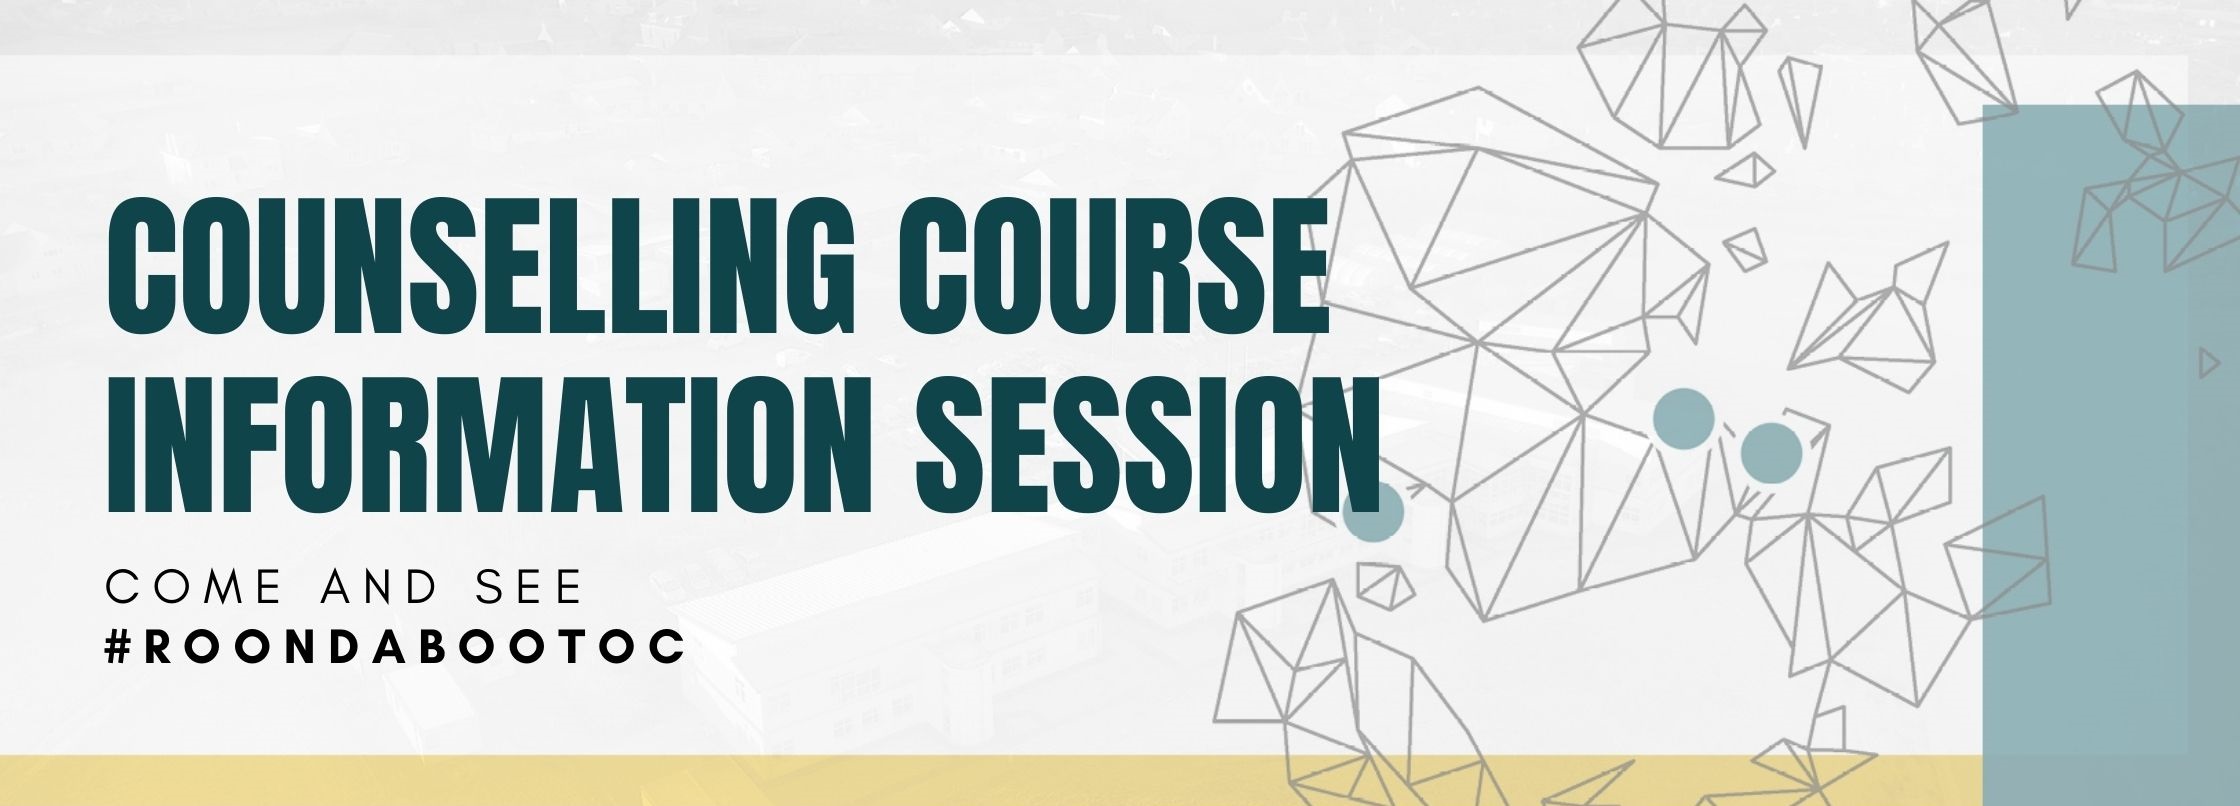 Counselling course information session | Come and see | roondabootoc